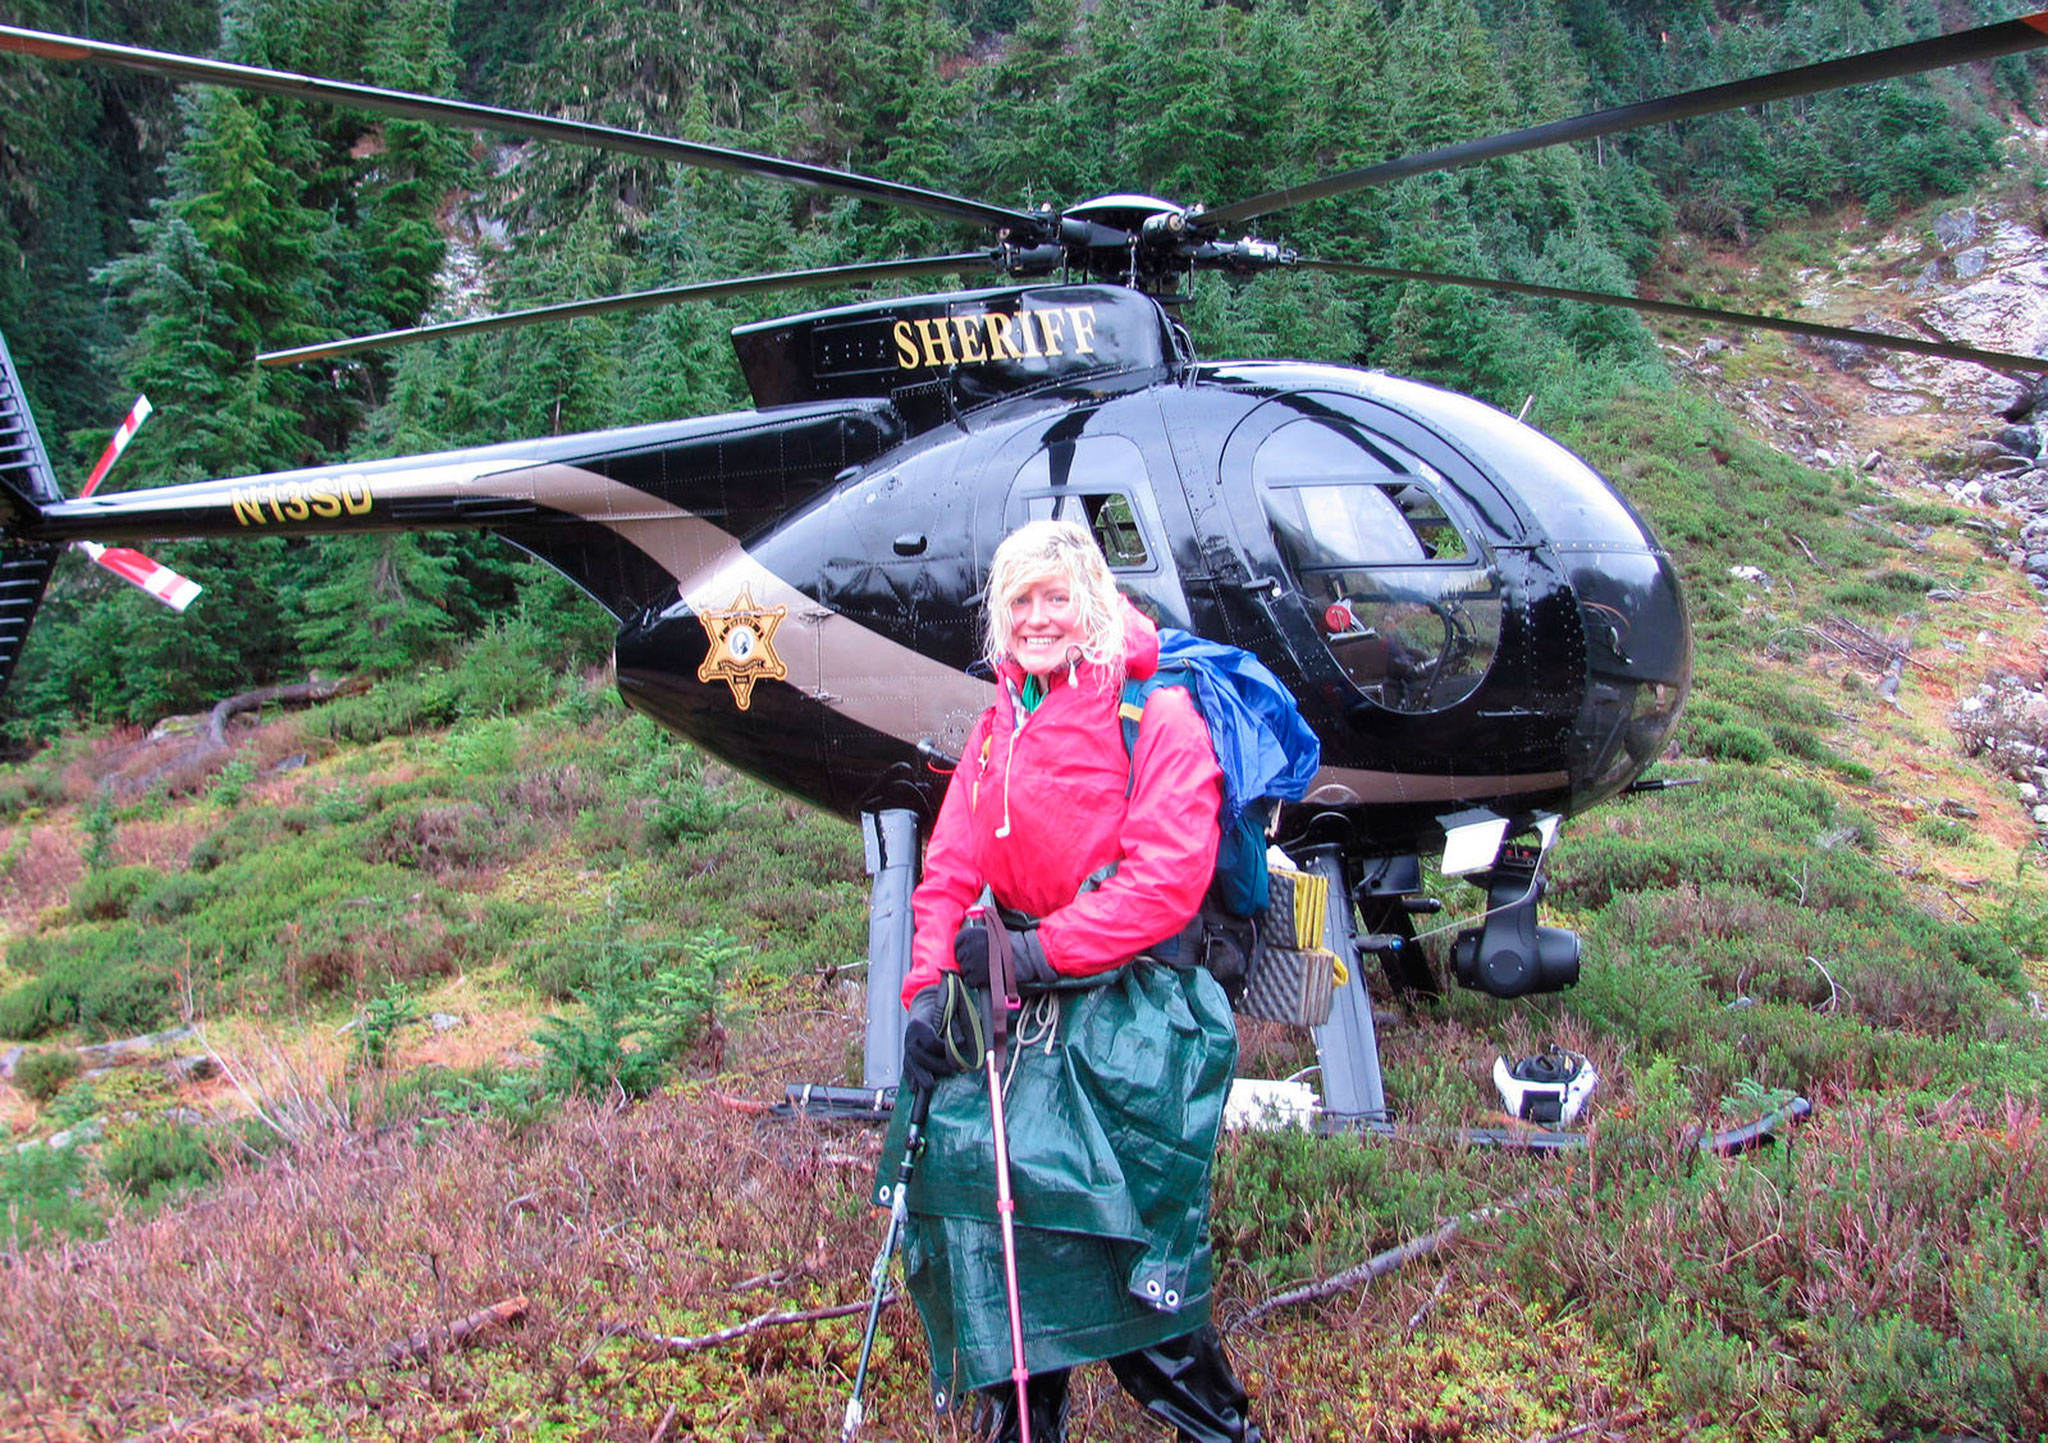 Katharina Groene, of Munich, Germany, with a Snohomish County Sheriff’s Office helicopter after her rescue on Monday near Mica Lake on the Pacific Crest Trail in the Glacier Peak Wilderness. (Provided by Katharina Groene)